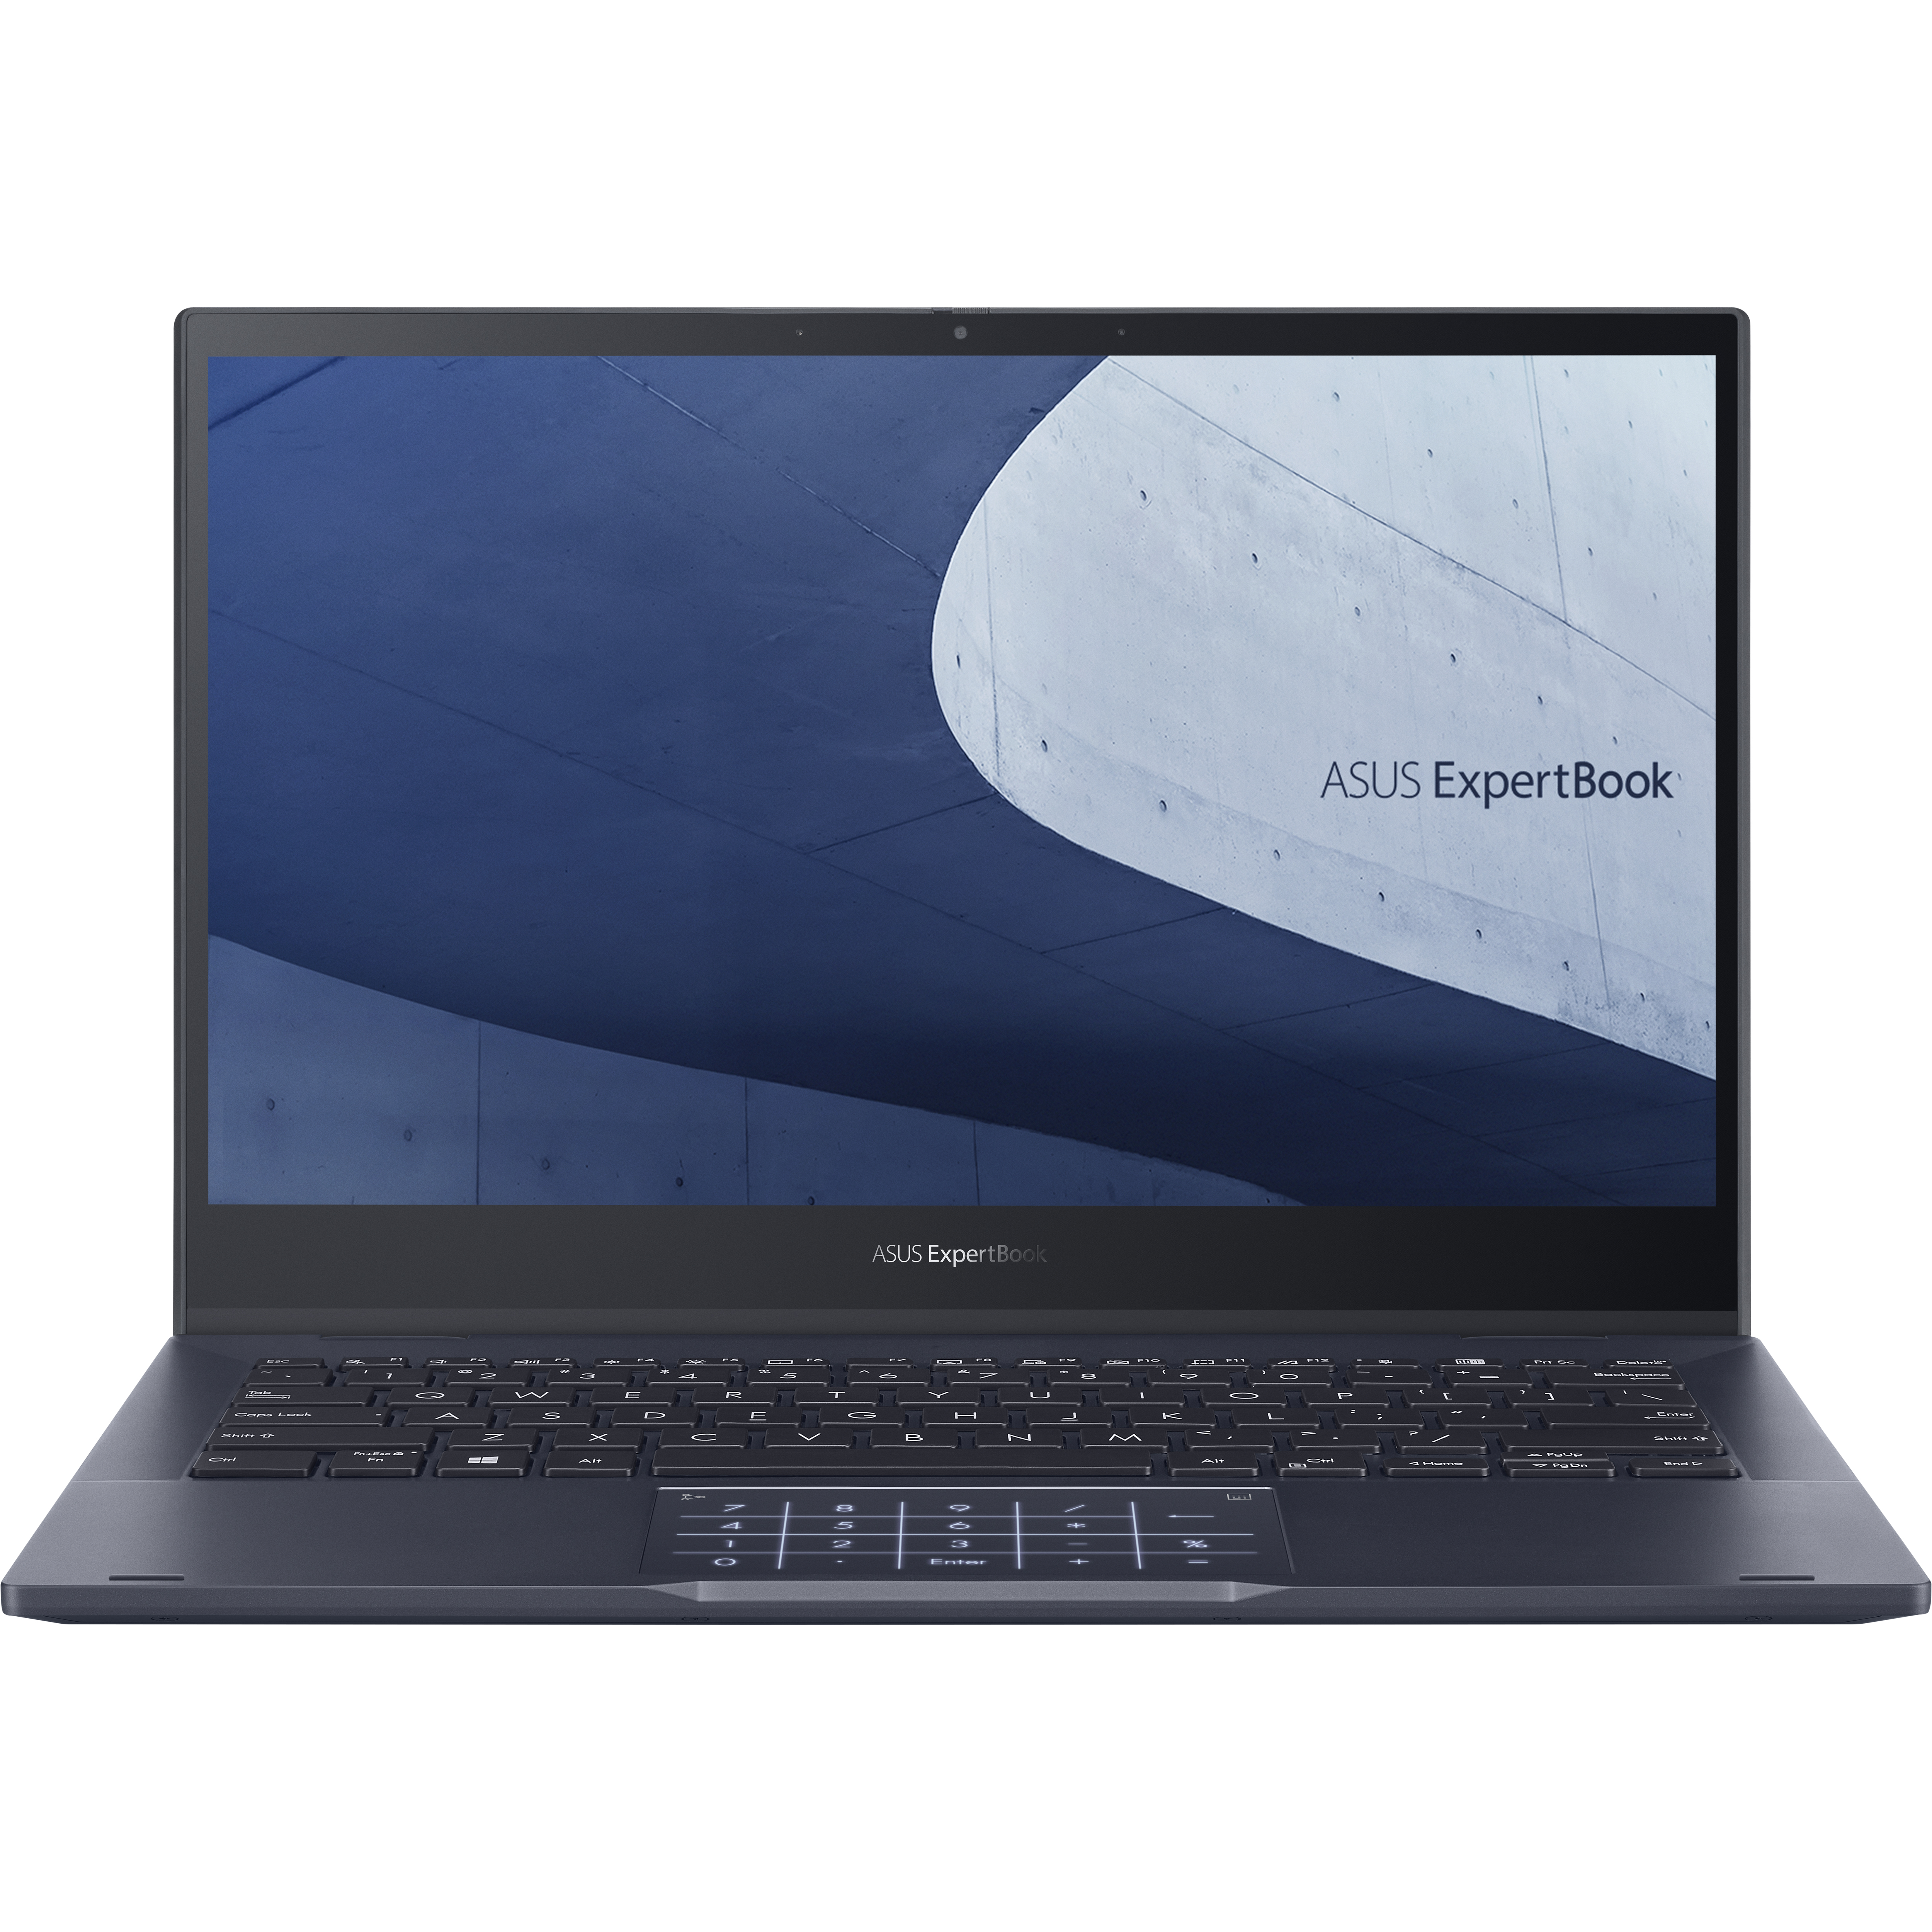 ASUS EXPERTBOOK B5 13.3IN I5-1135G7 16G 256G W10P US KB